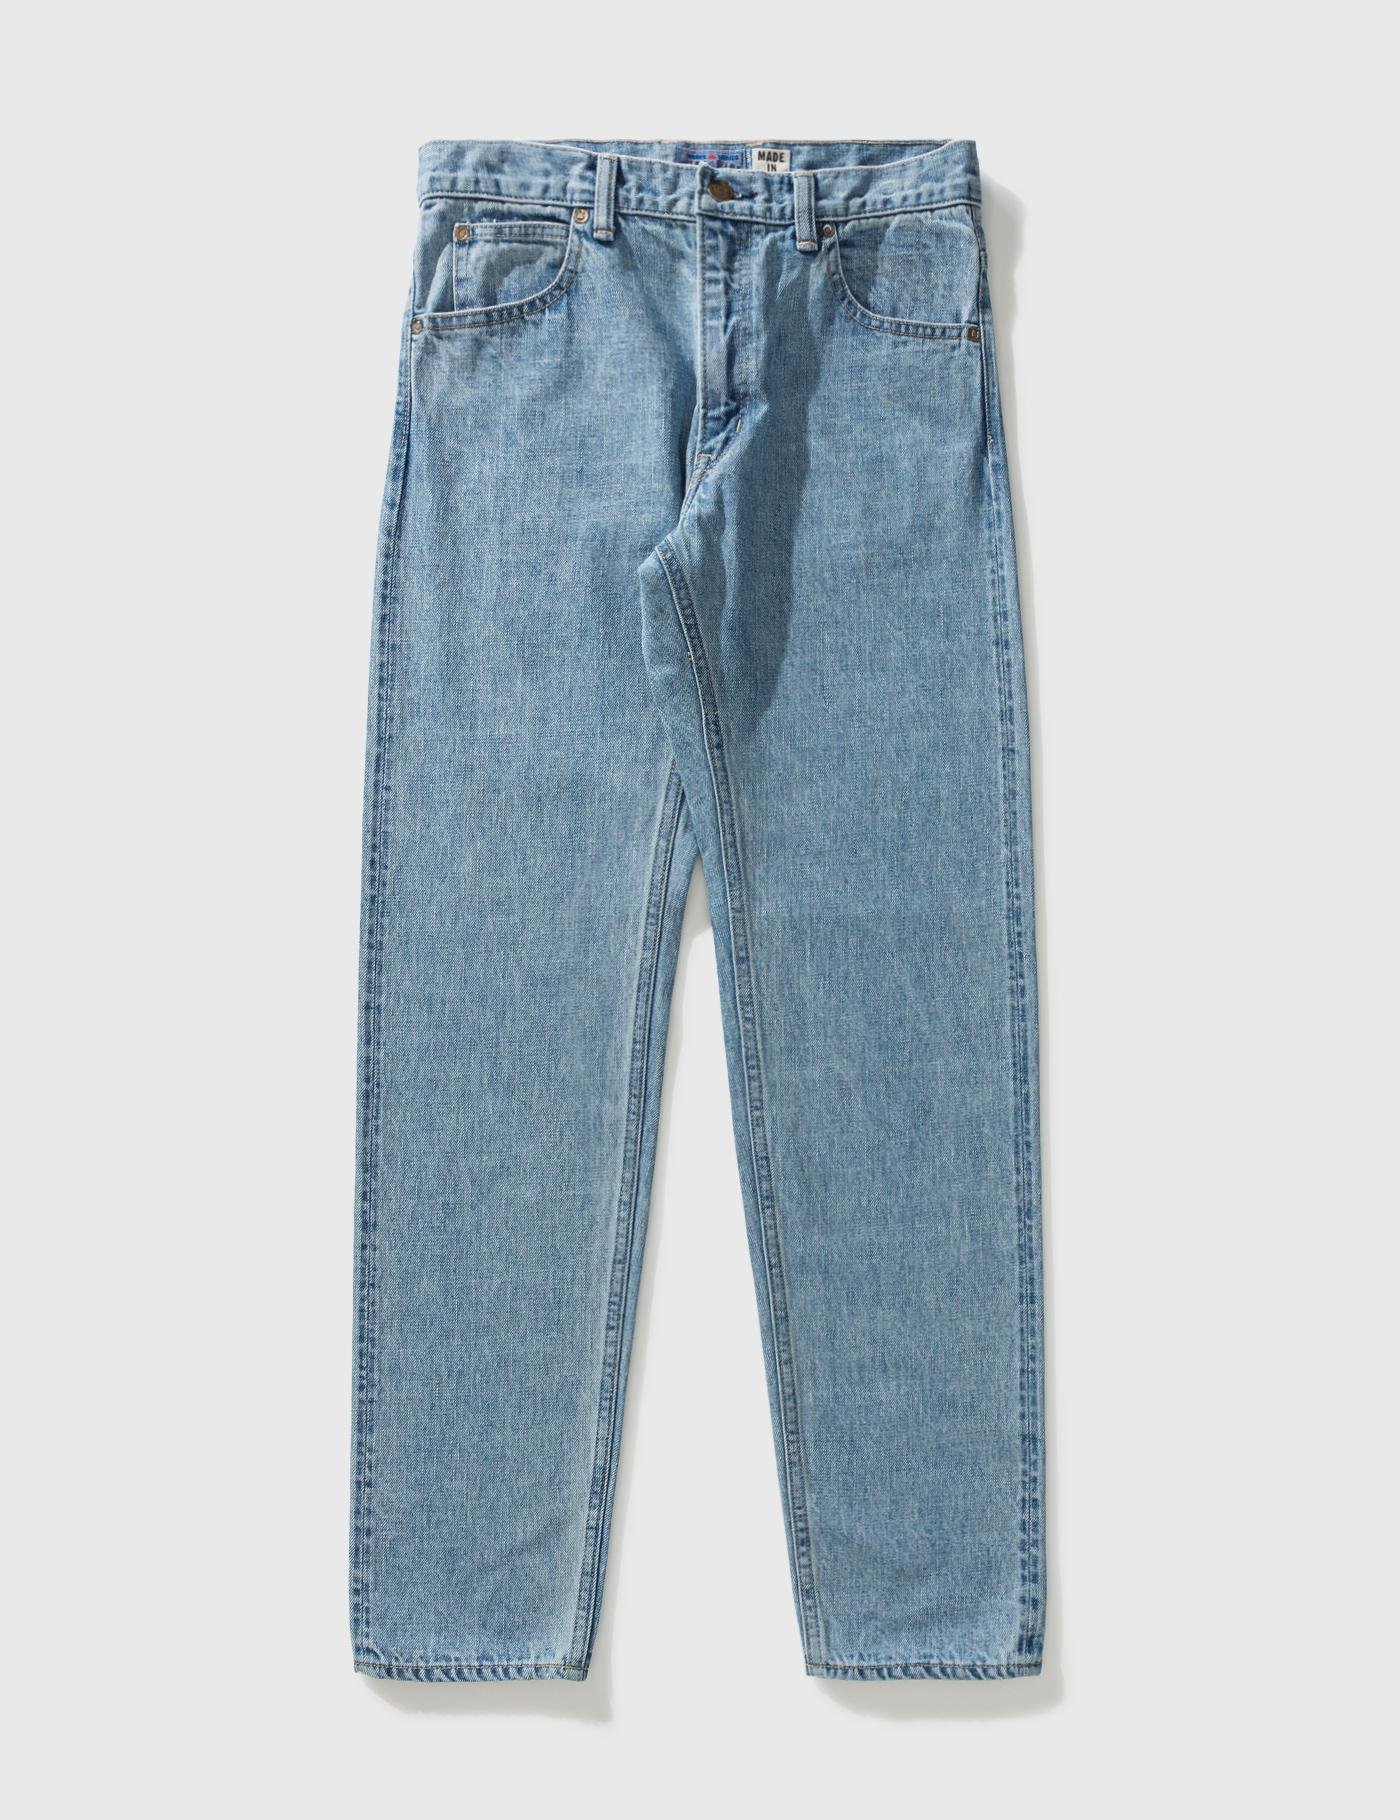 Selvedge Worn Out Slim Jeans by BLUE BLUE JAPAN